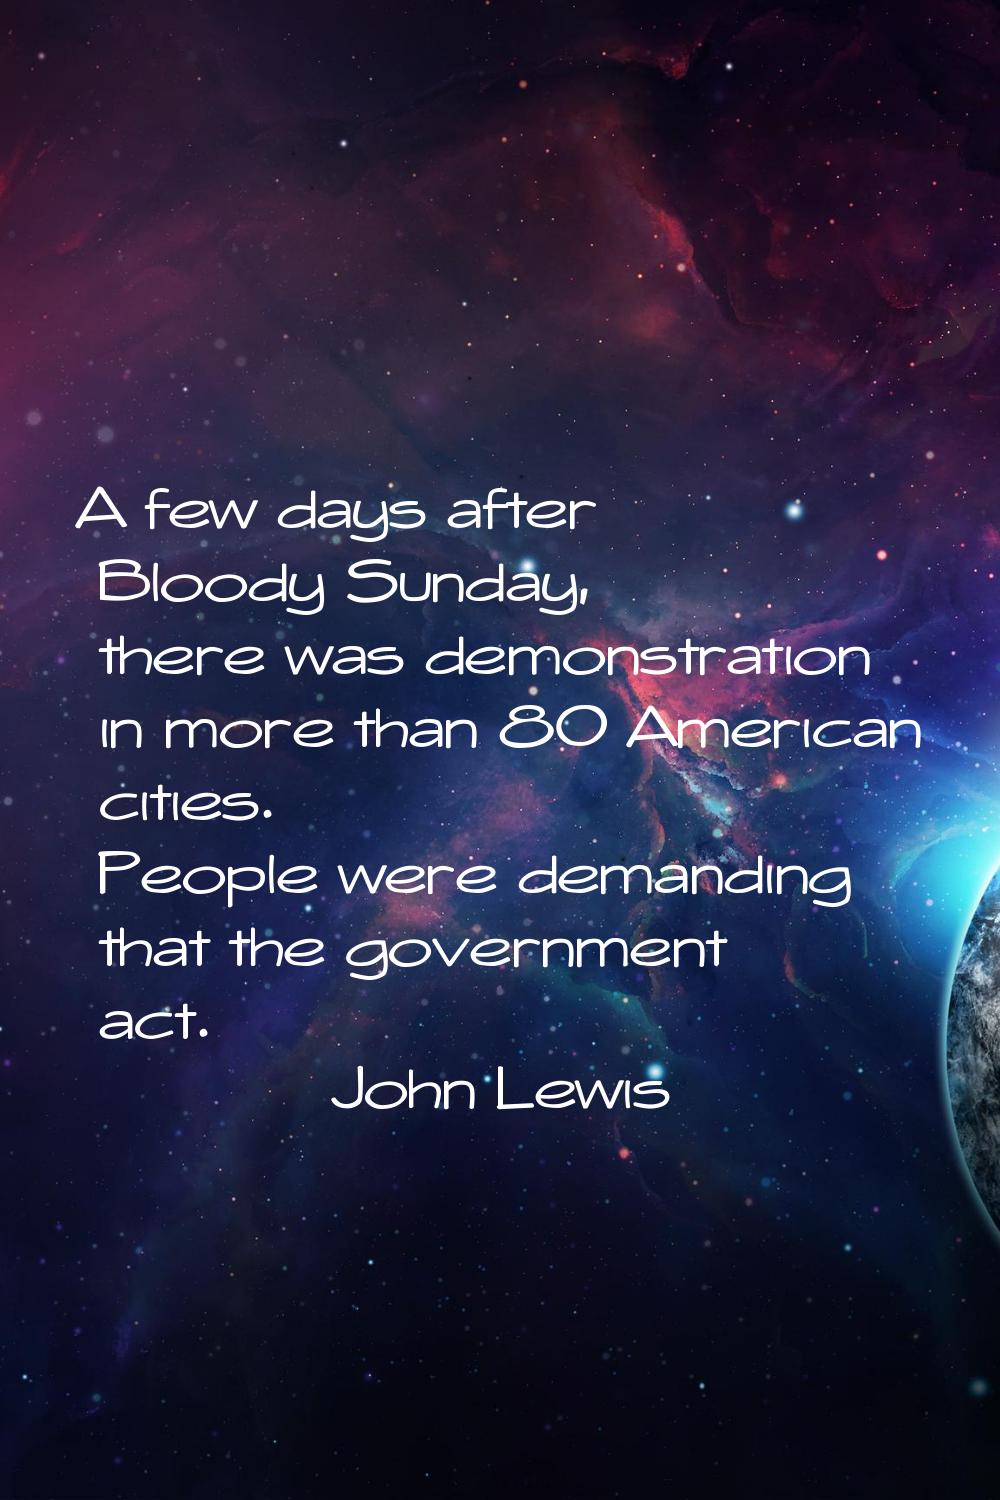 A few days after Bloody Sunday, there was demonstration in more than 80 American cities. People wer